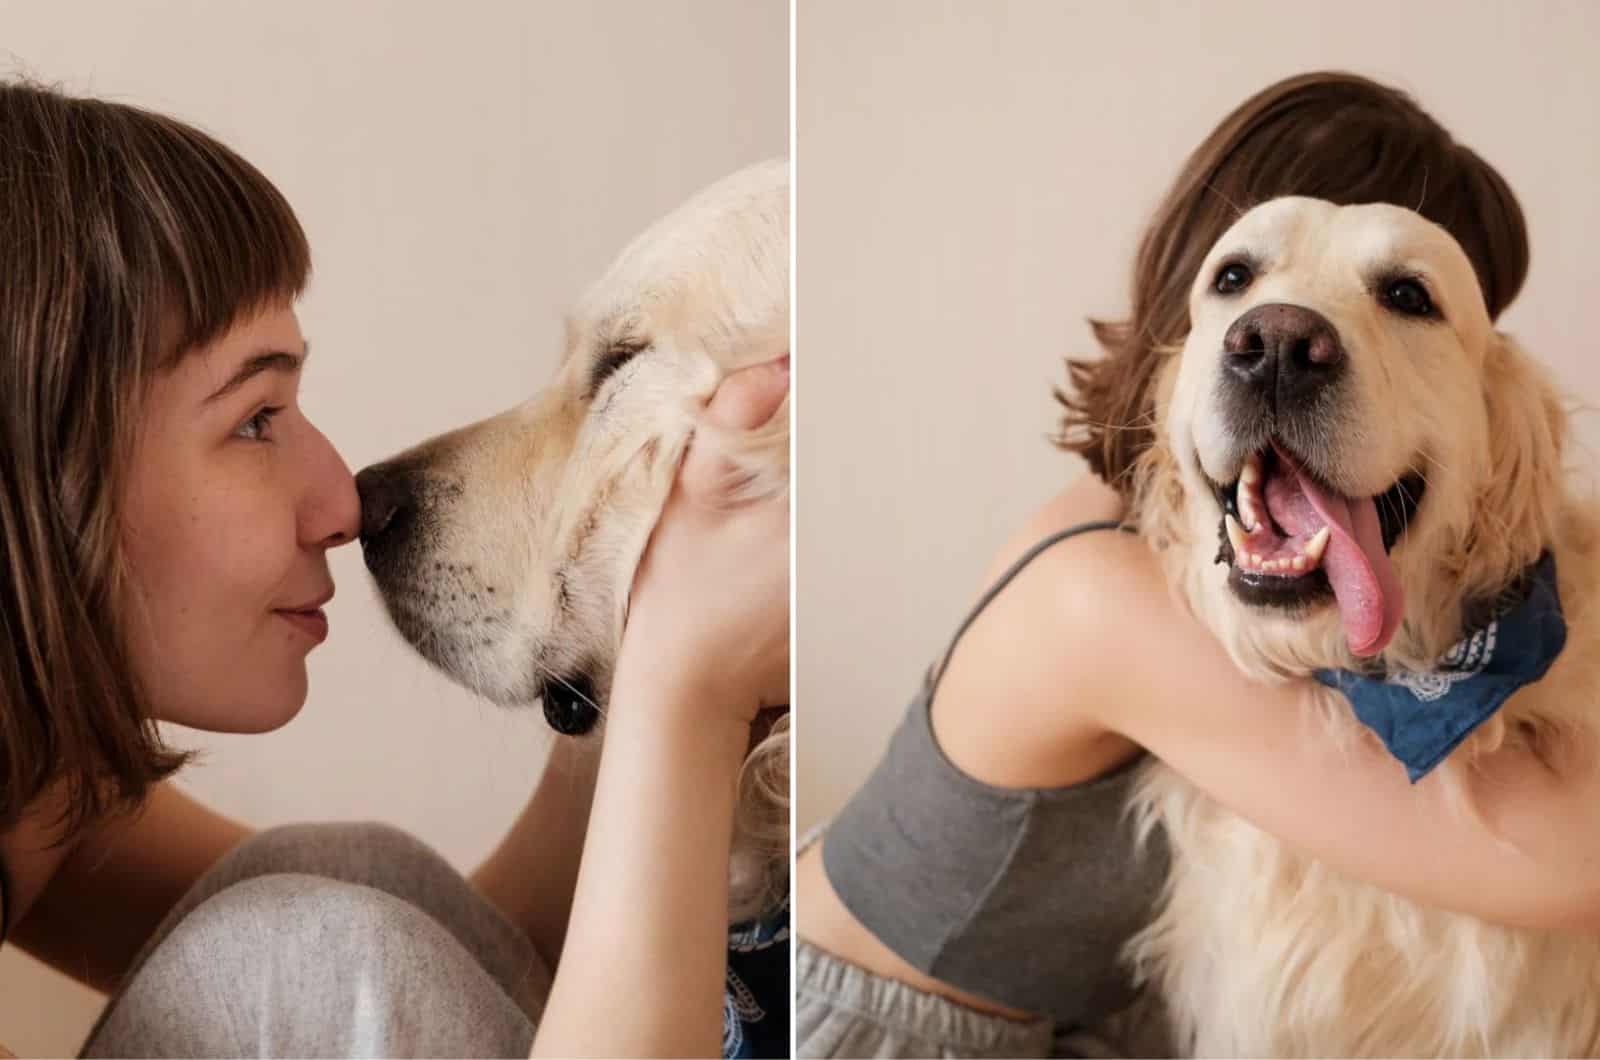 10 Minutes Of Petting Your Dog Reduces Stress Levels According To A Study